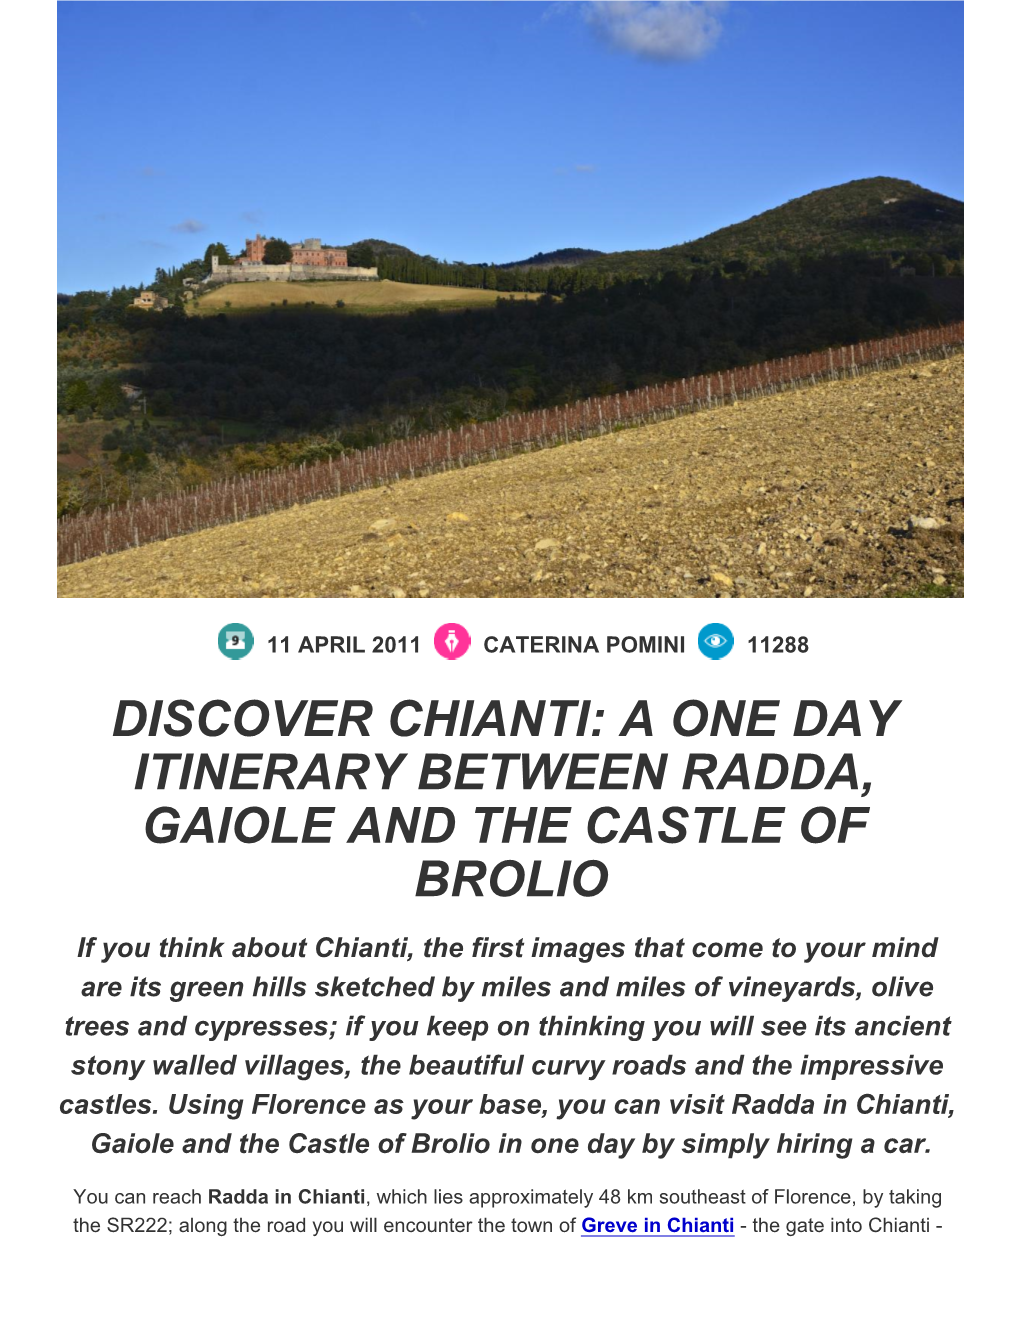 Discover Chianti: a One Day Itinerary Between Radda, Gaiole and the Castle of Brolio